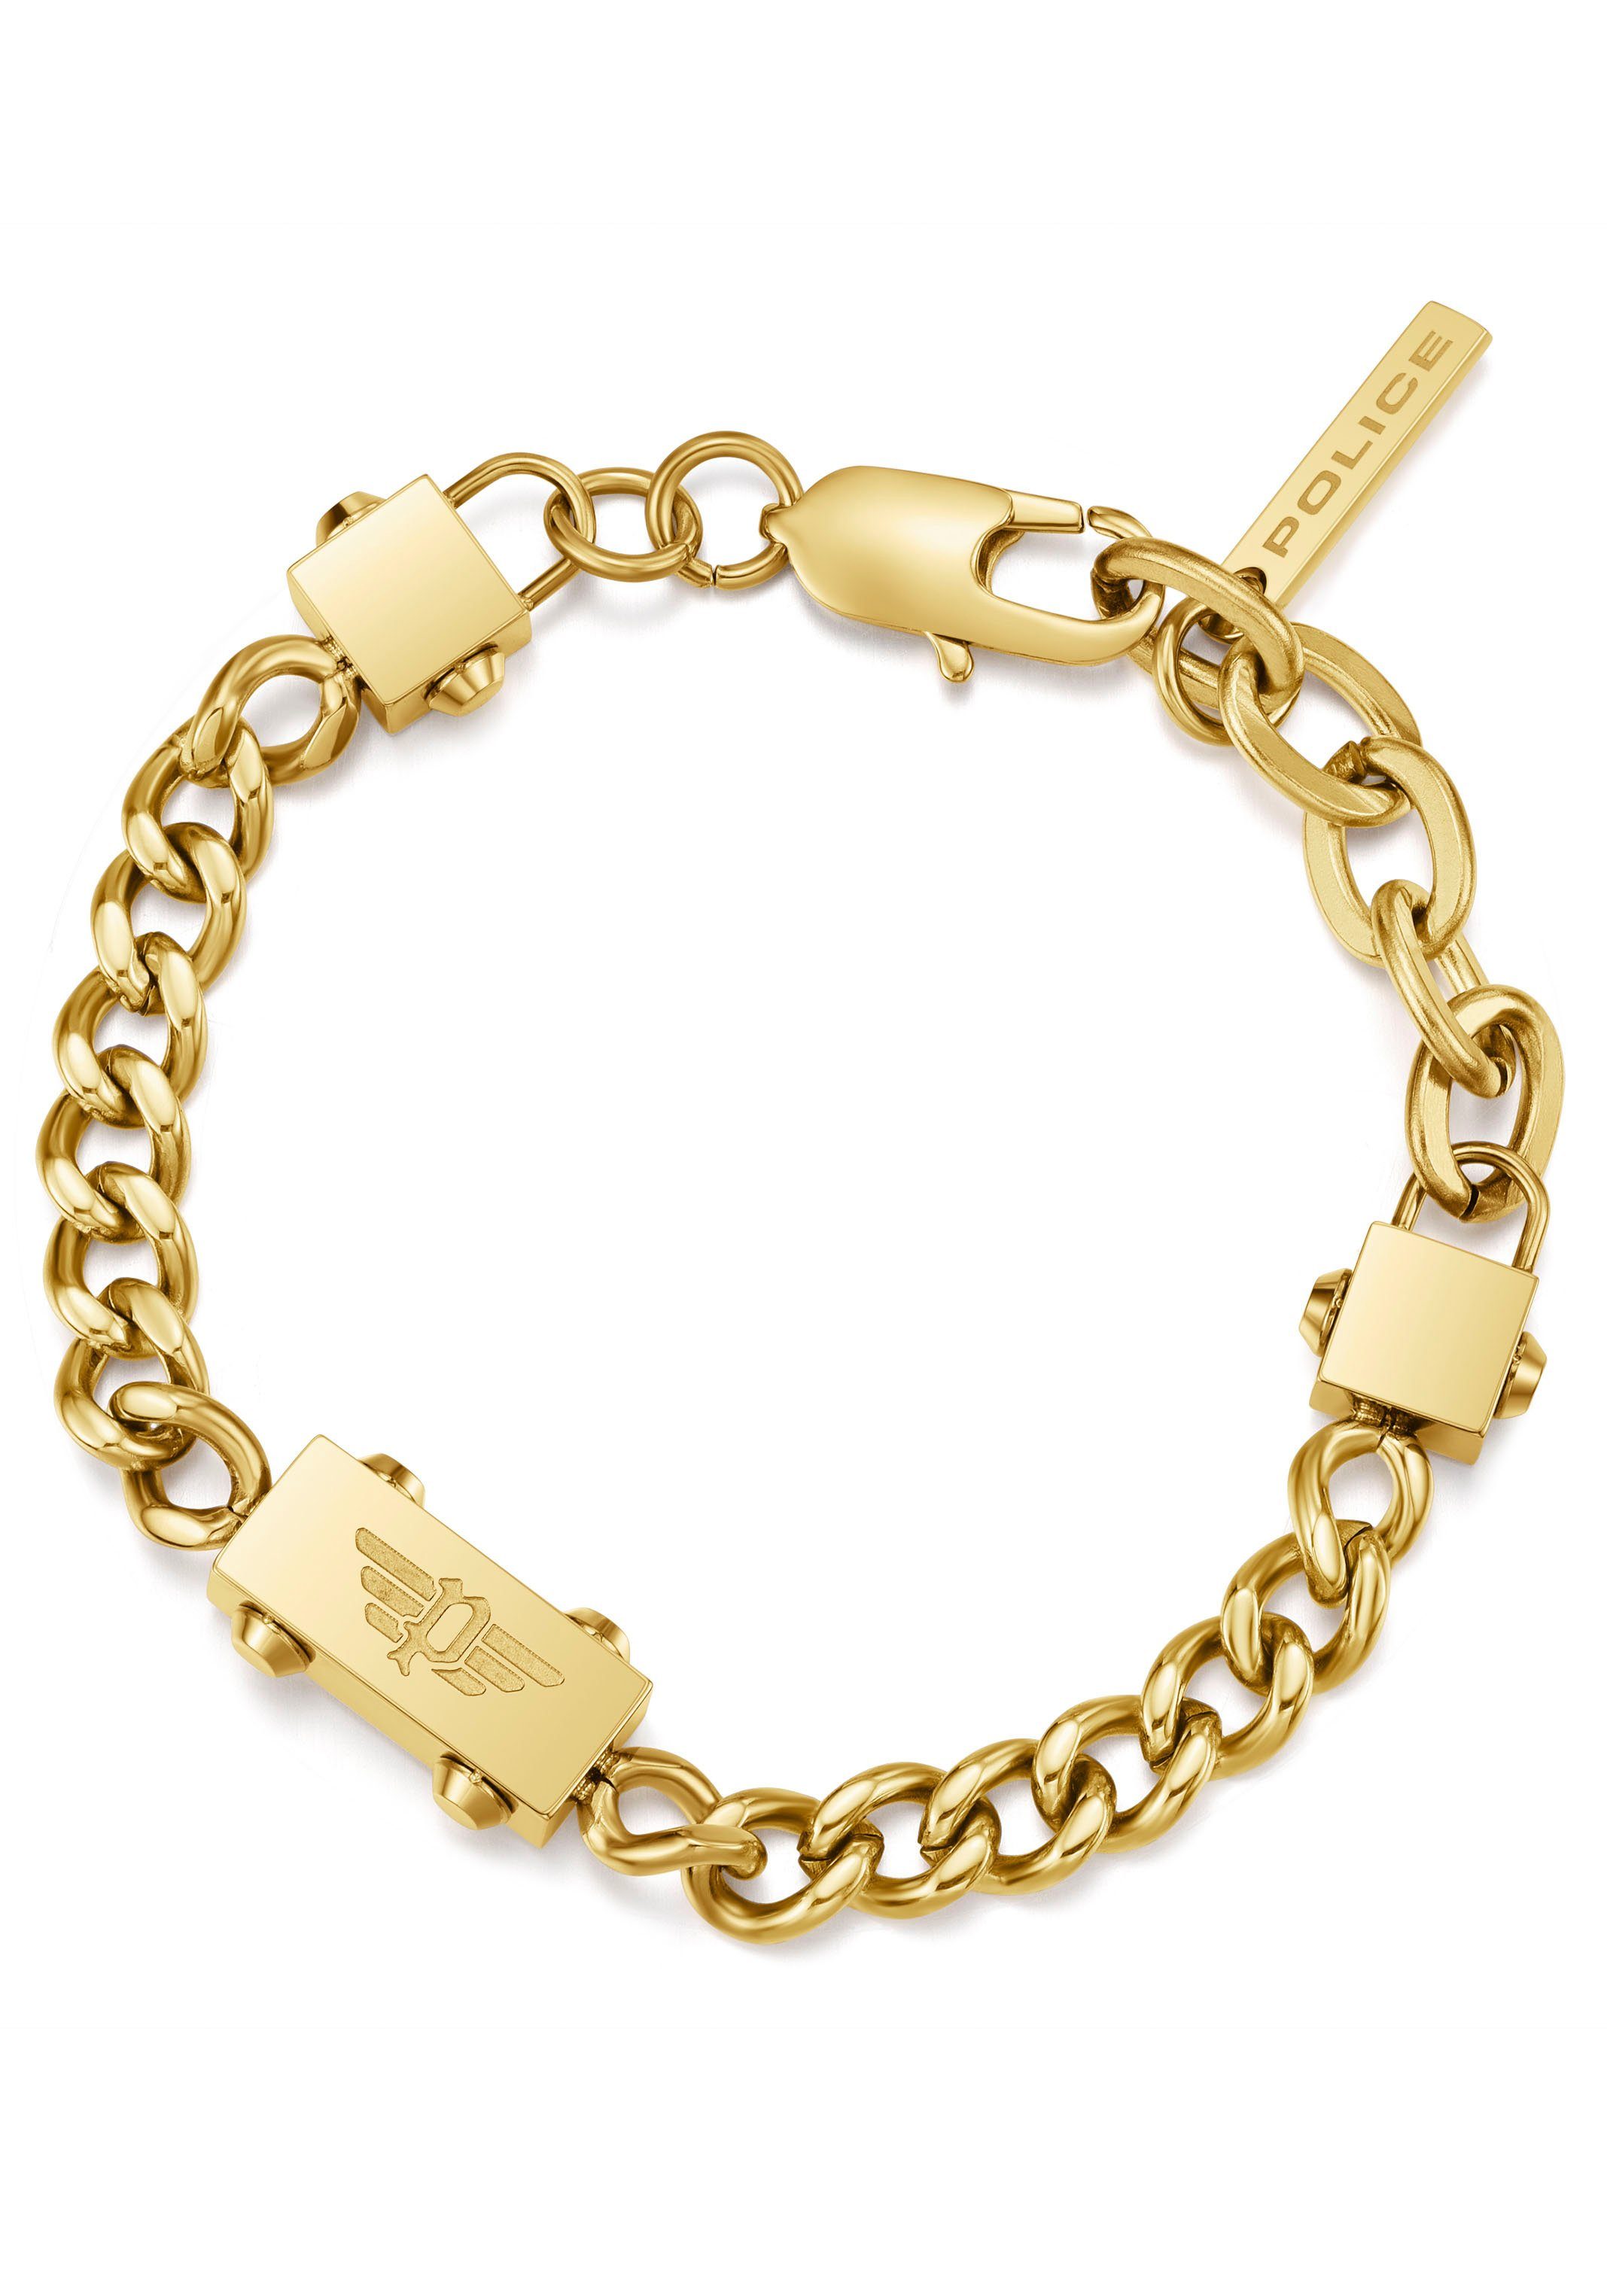 Police Armband CHAINED, PEAGB0002102, PEAGB0002106 gelbgoldfarben | Armbänder